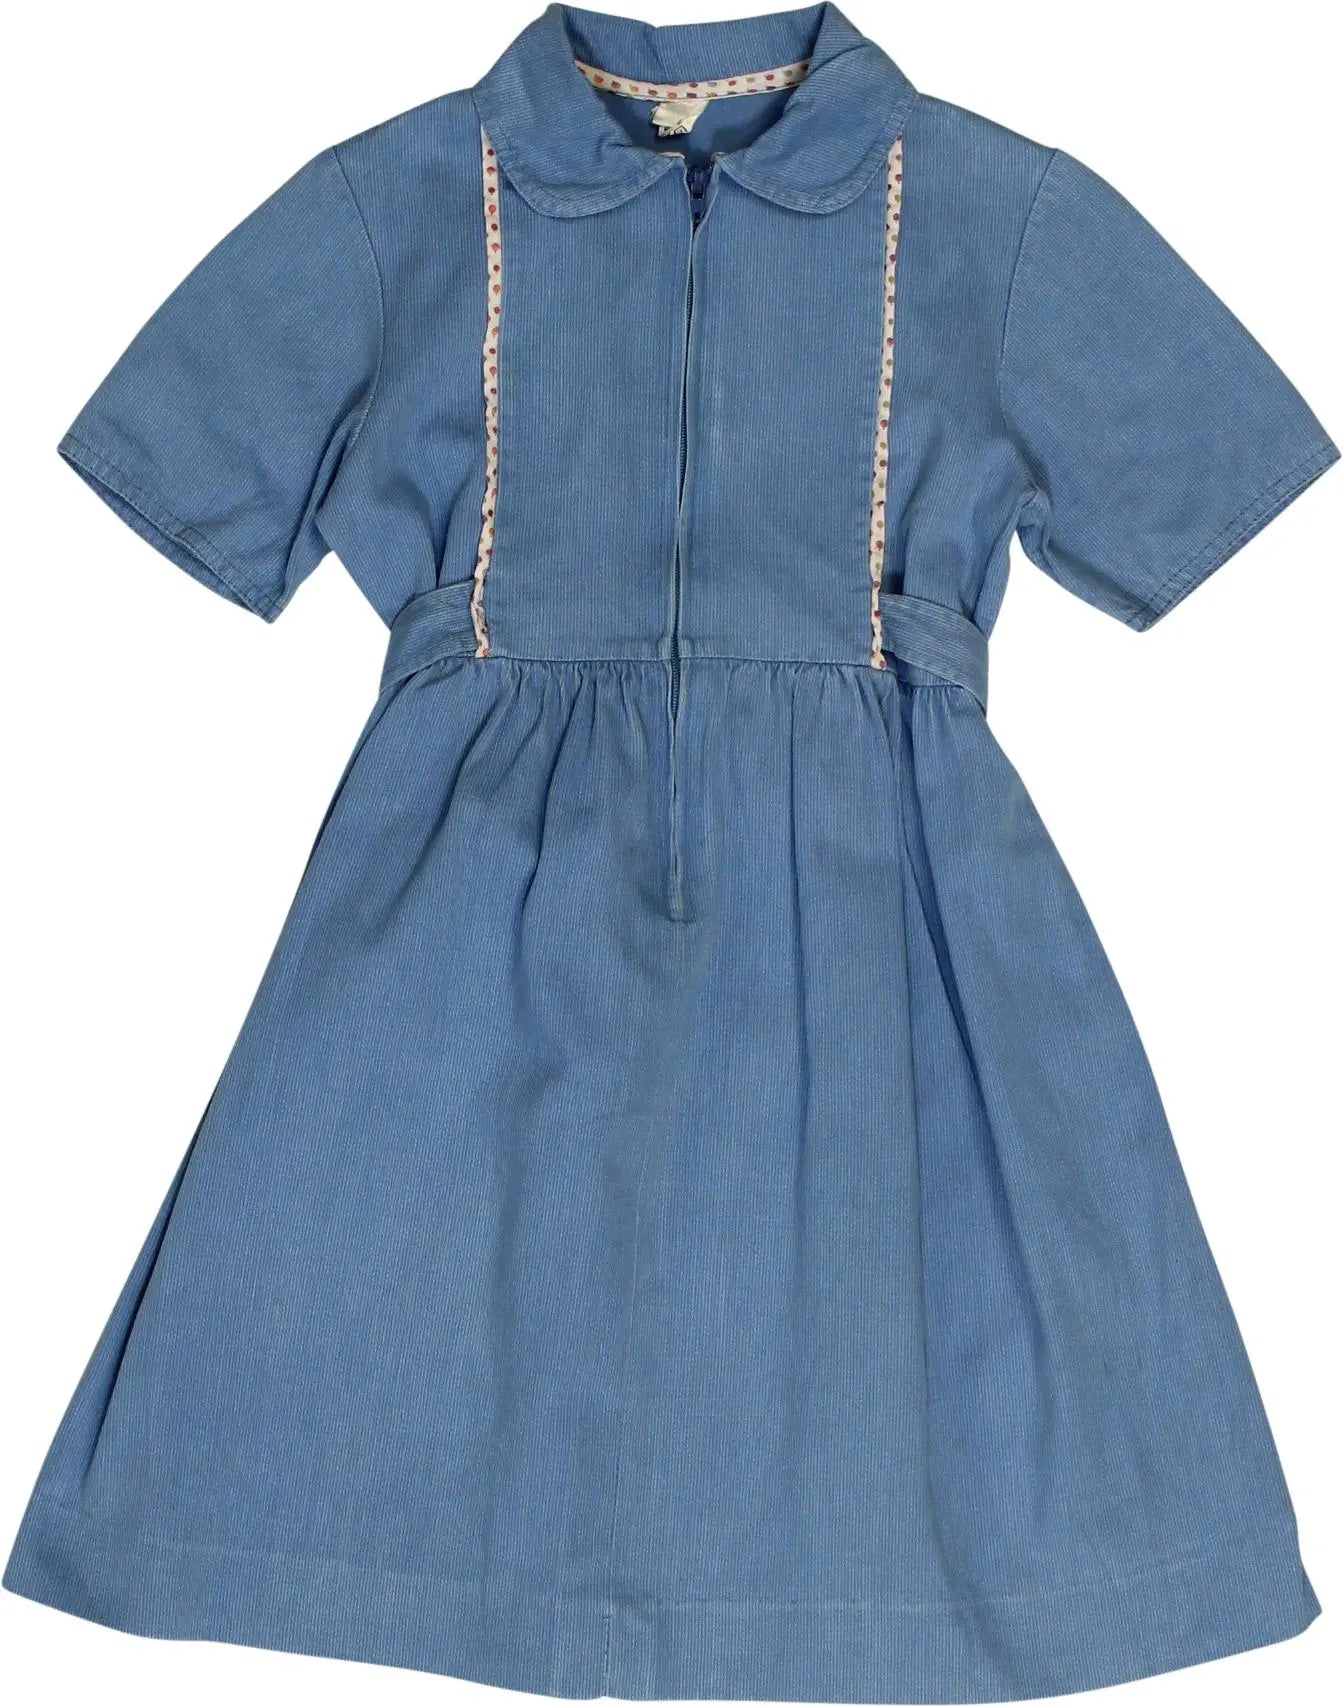 Unknown - Blue Dress- ThriftTale.com - Vintage and second handclothing